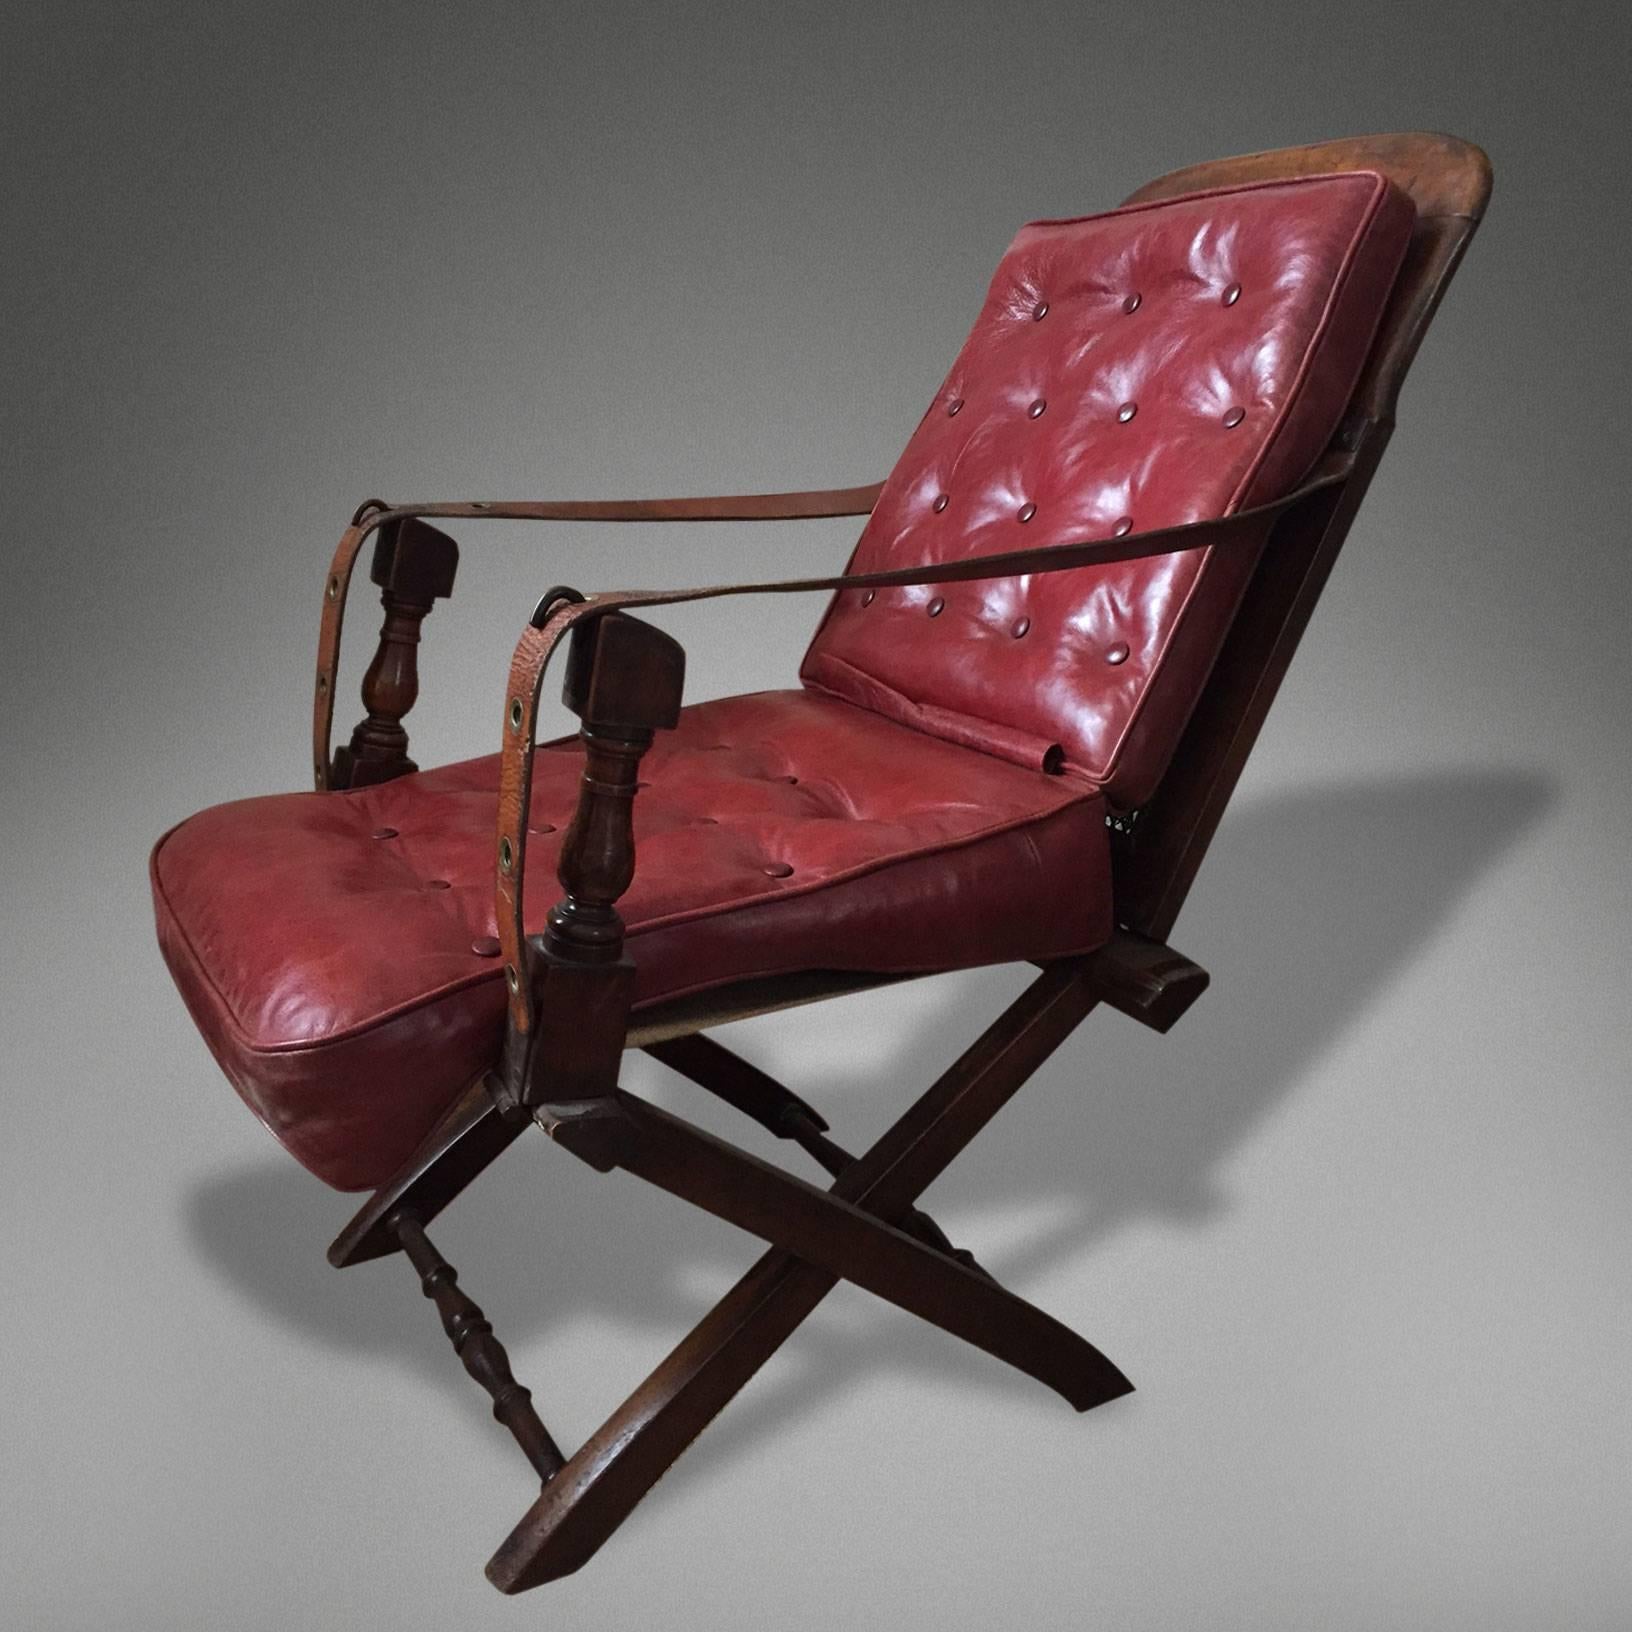 A satin birch douro chair possibly by Allen with adjustable back, 
circa 1875.